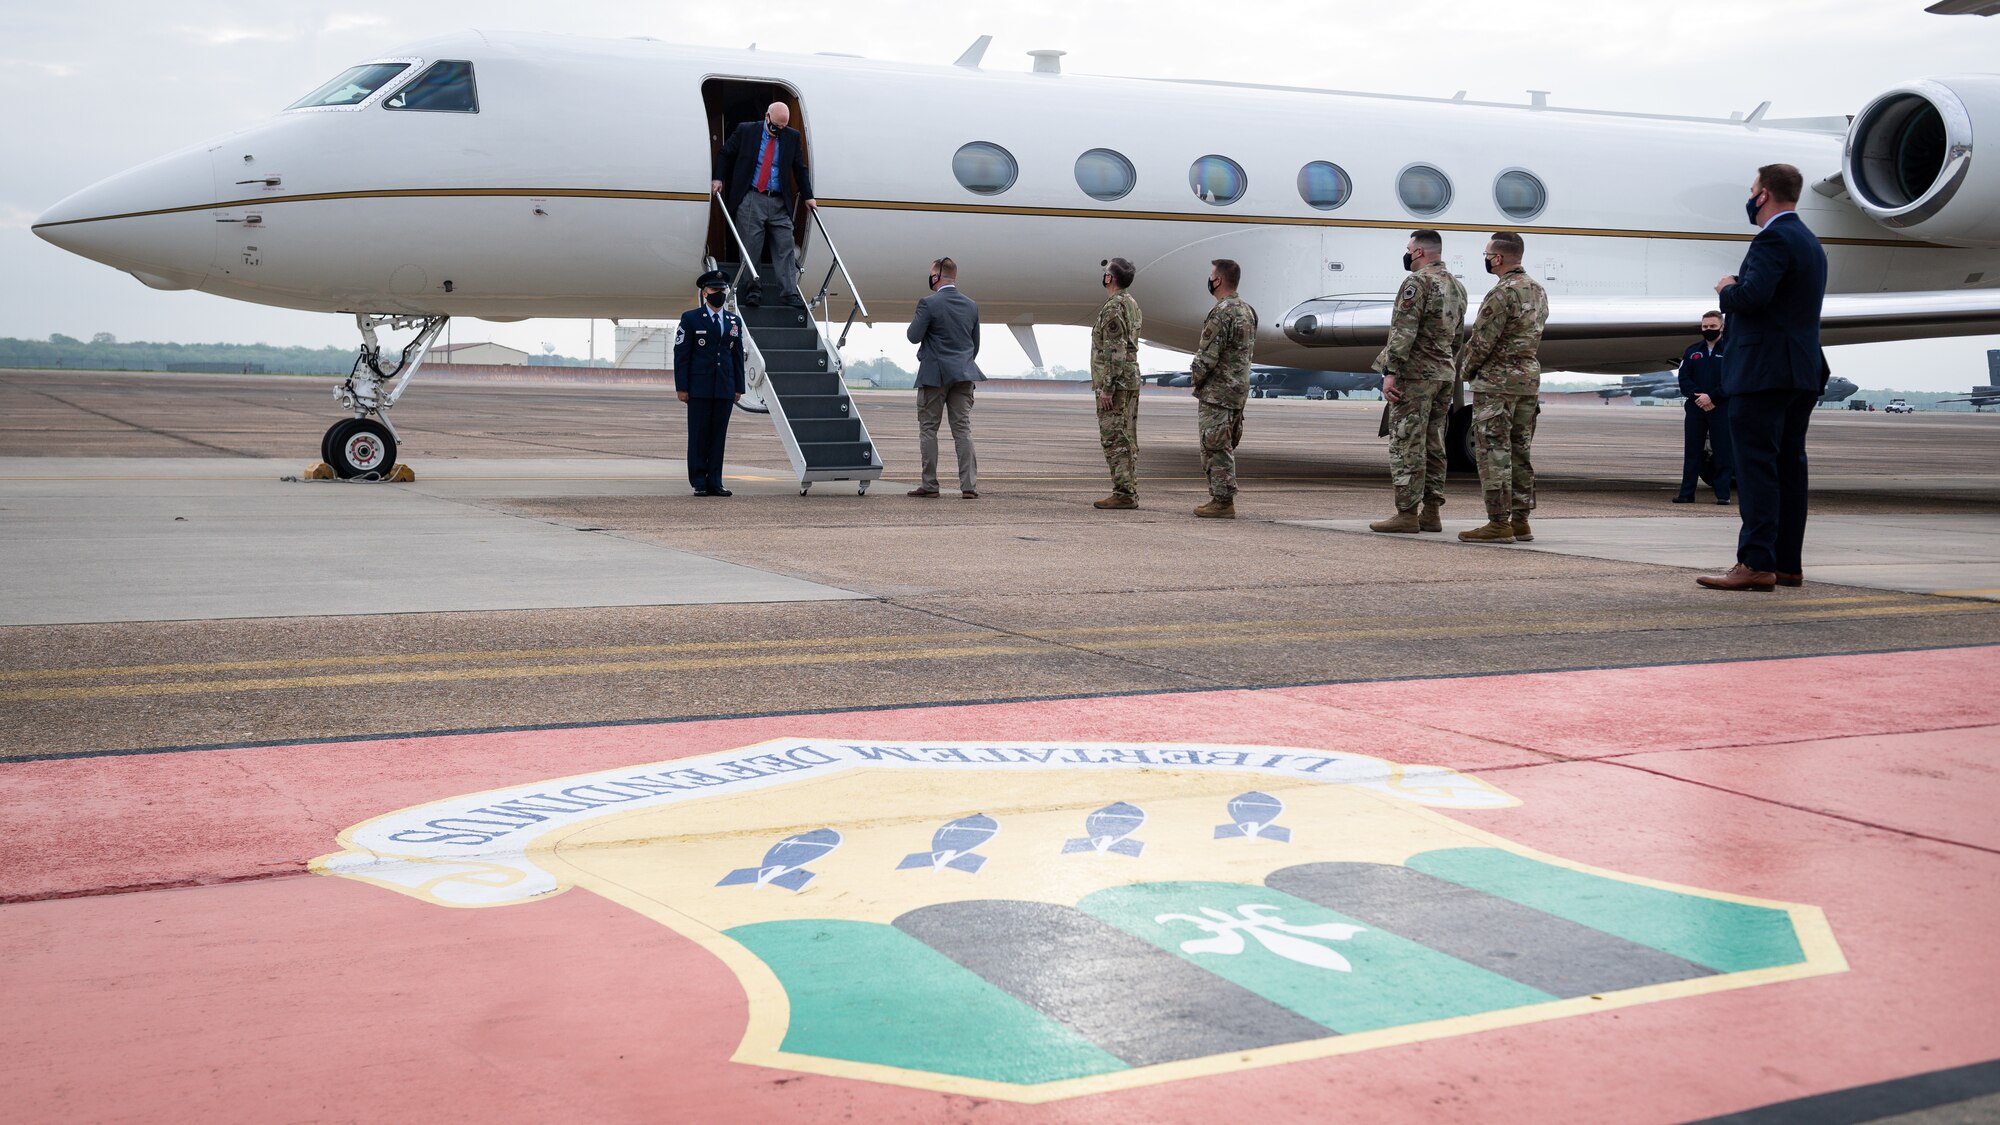 Leaders from the 2nd Bomb Wing and Air Force Global Strike Command greet the Honorable John P. Roth, acting Secretary of the Air Force, at Barksdale Air Force Base, Louisiana, April 6, 2021.